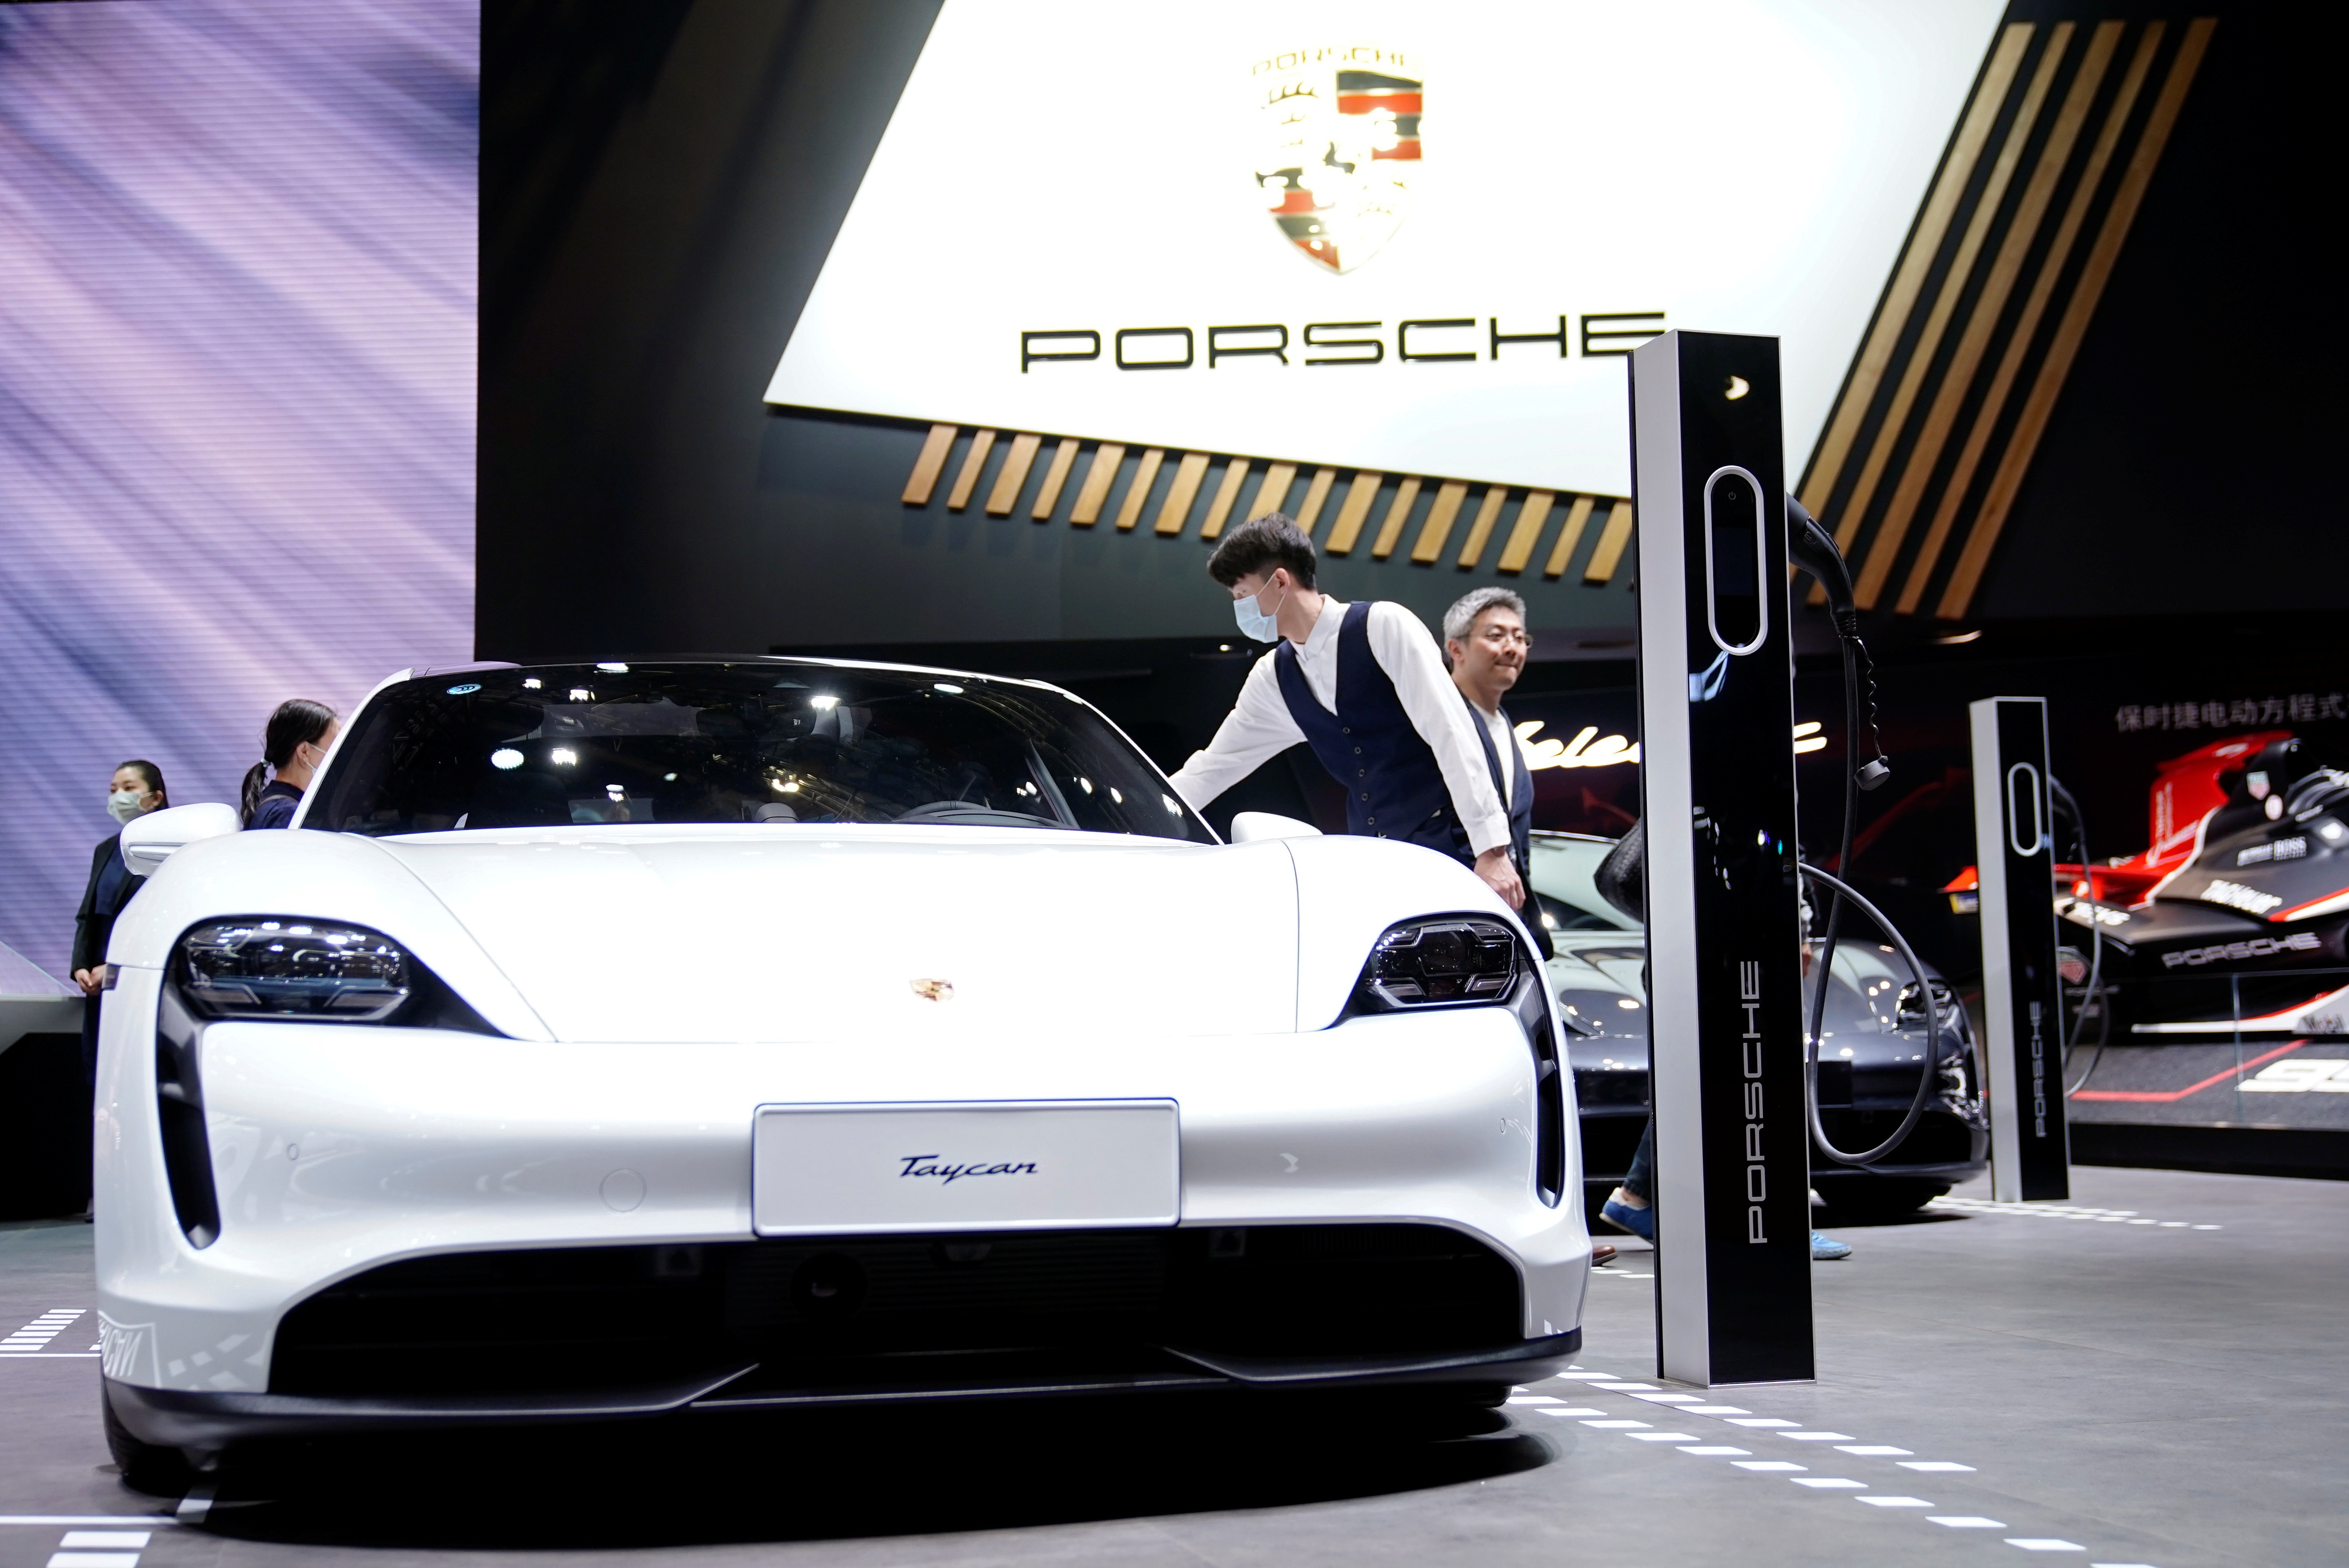 A Porsche Taycan electric vehicle (EV) displayed in the Auto Shanghai show in Shanghai, (Picture credit: Reuters)